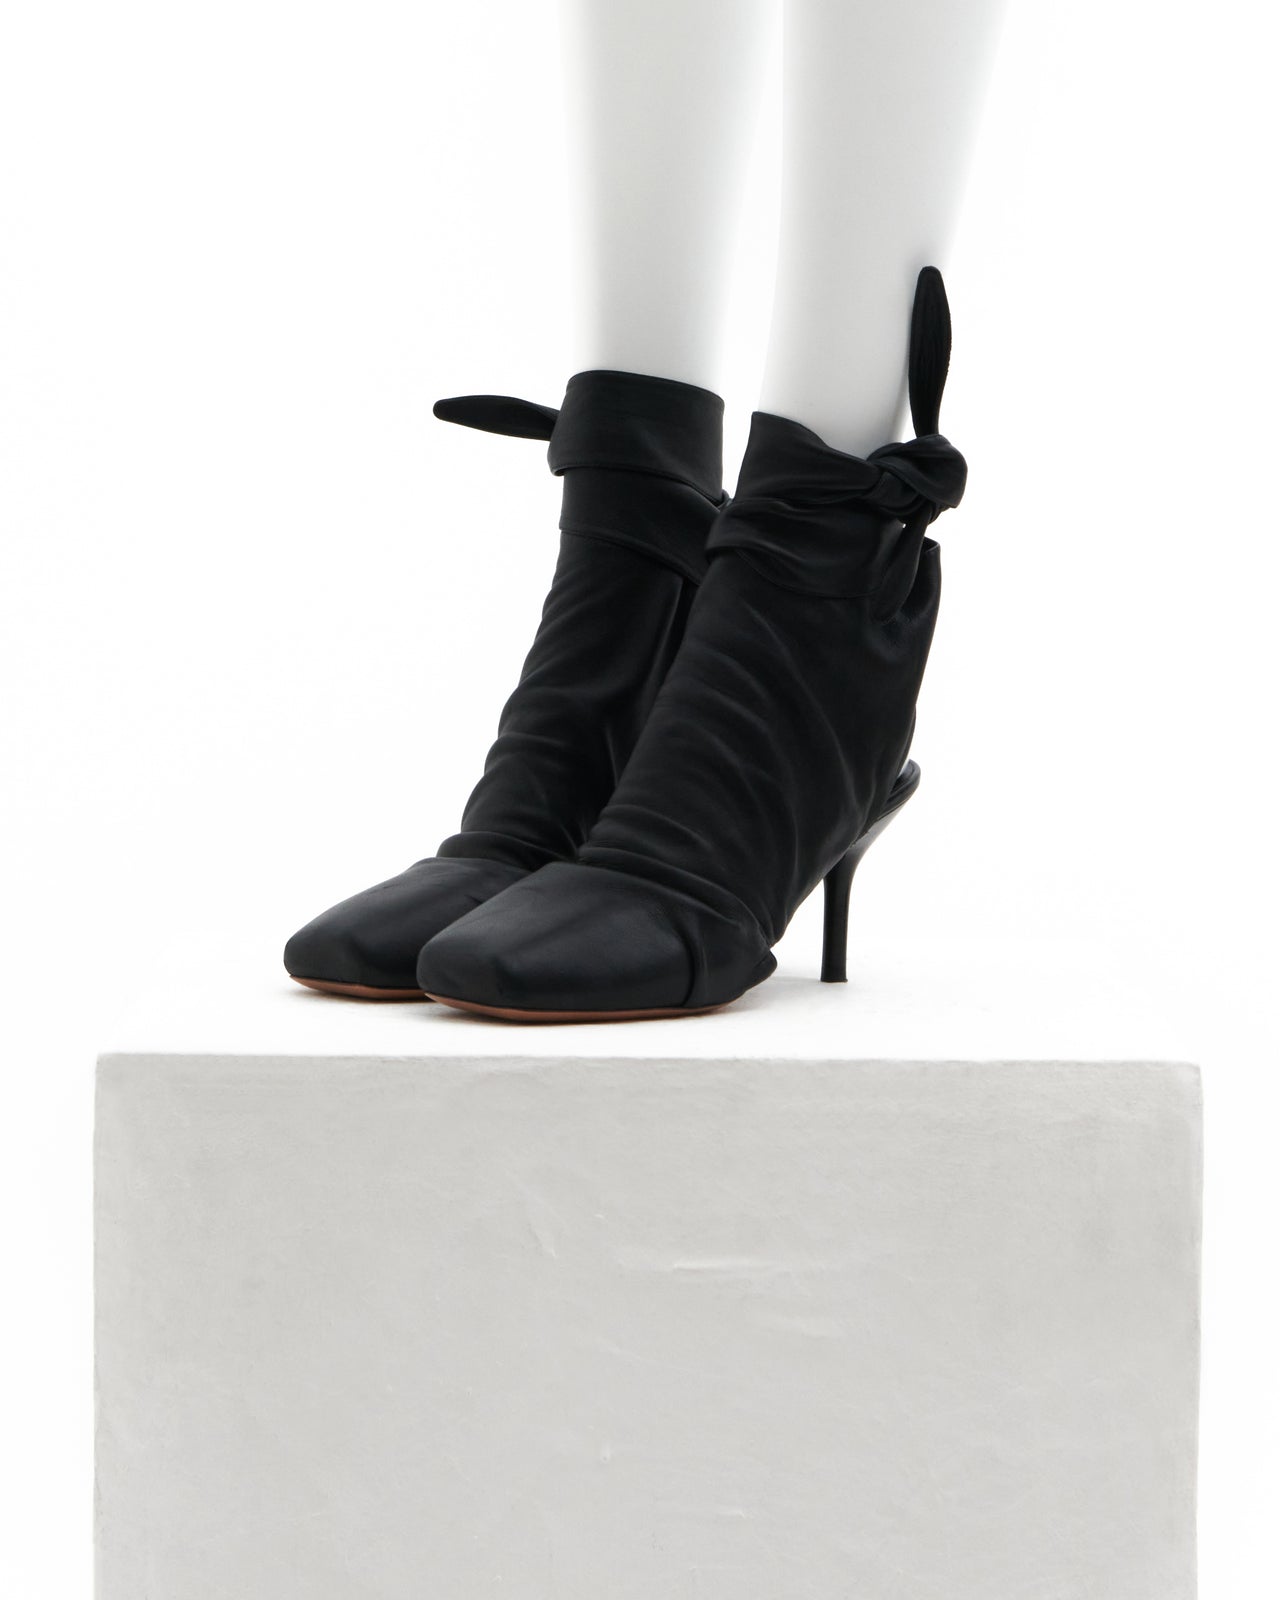 Céline by Phoebe Philo Resort 2018 Black wrapped backless ankle boots